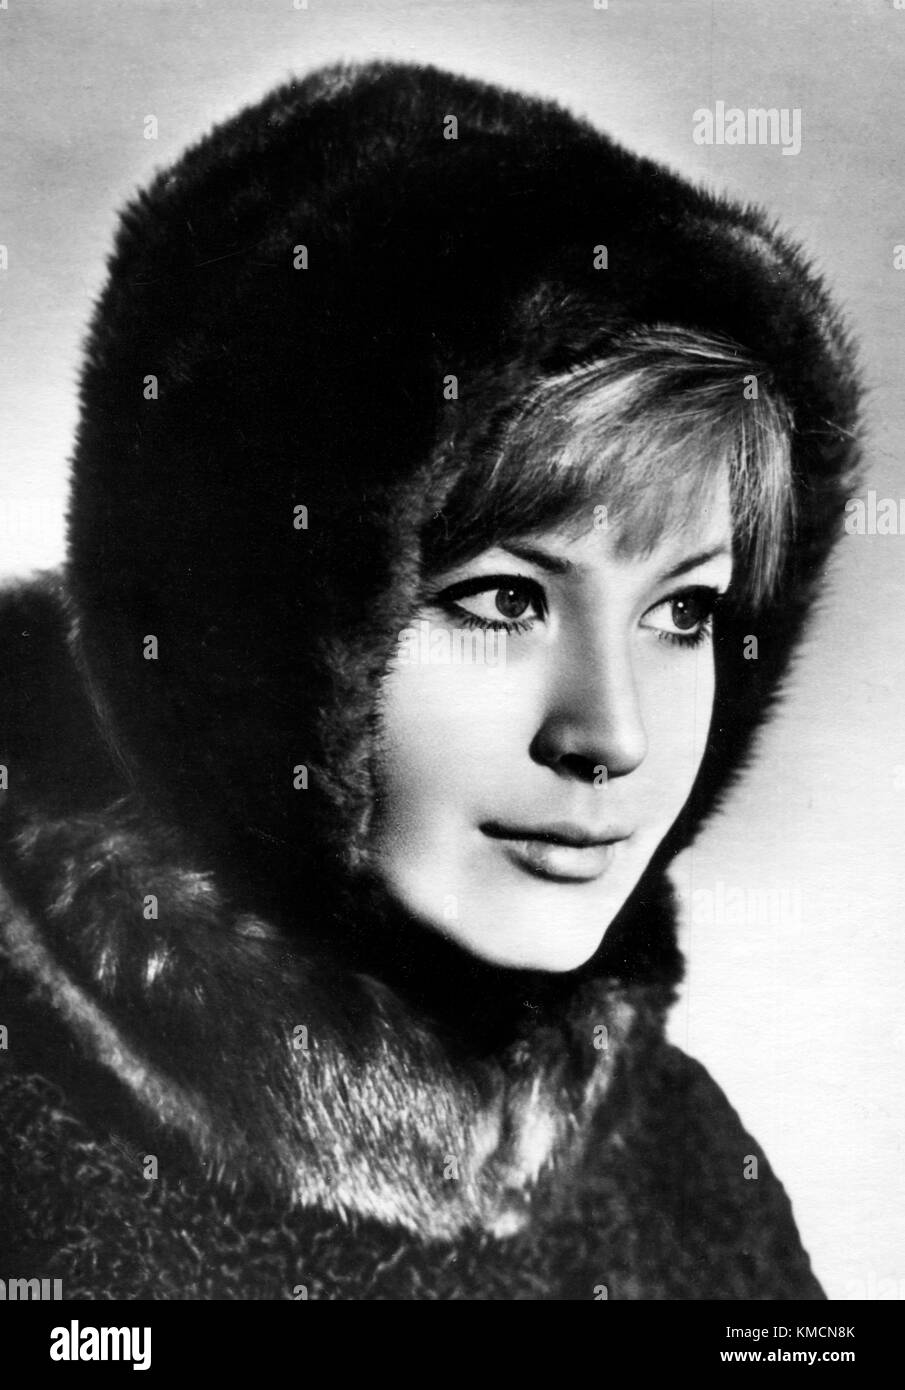 Lyudmila Maksakova. Photo by G. Ter-Ovanesov. Reproduction of the postcard, Russia, Moscow, 1965. Lyudmila Maksakova is a Soviet Russian stage and film actress who appeared in 24 films between 1965 and 1998. Honored with the People's Artist of Russia title in 1980, she is also a laureate of the USSR State Prize . Stock Photo